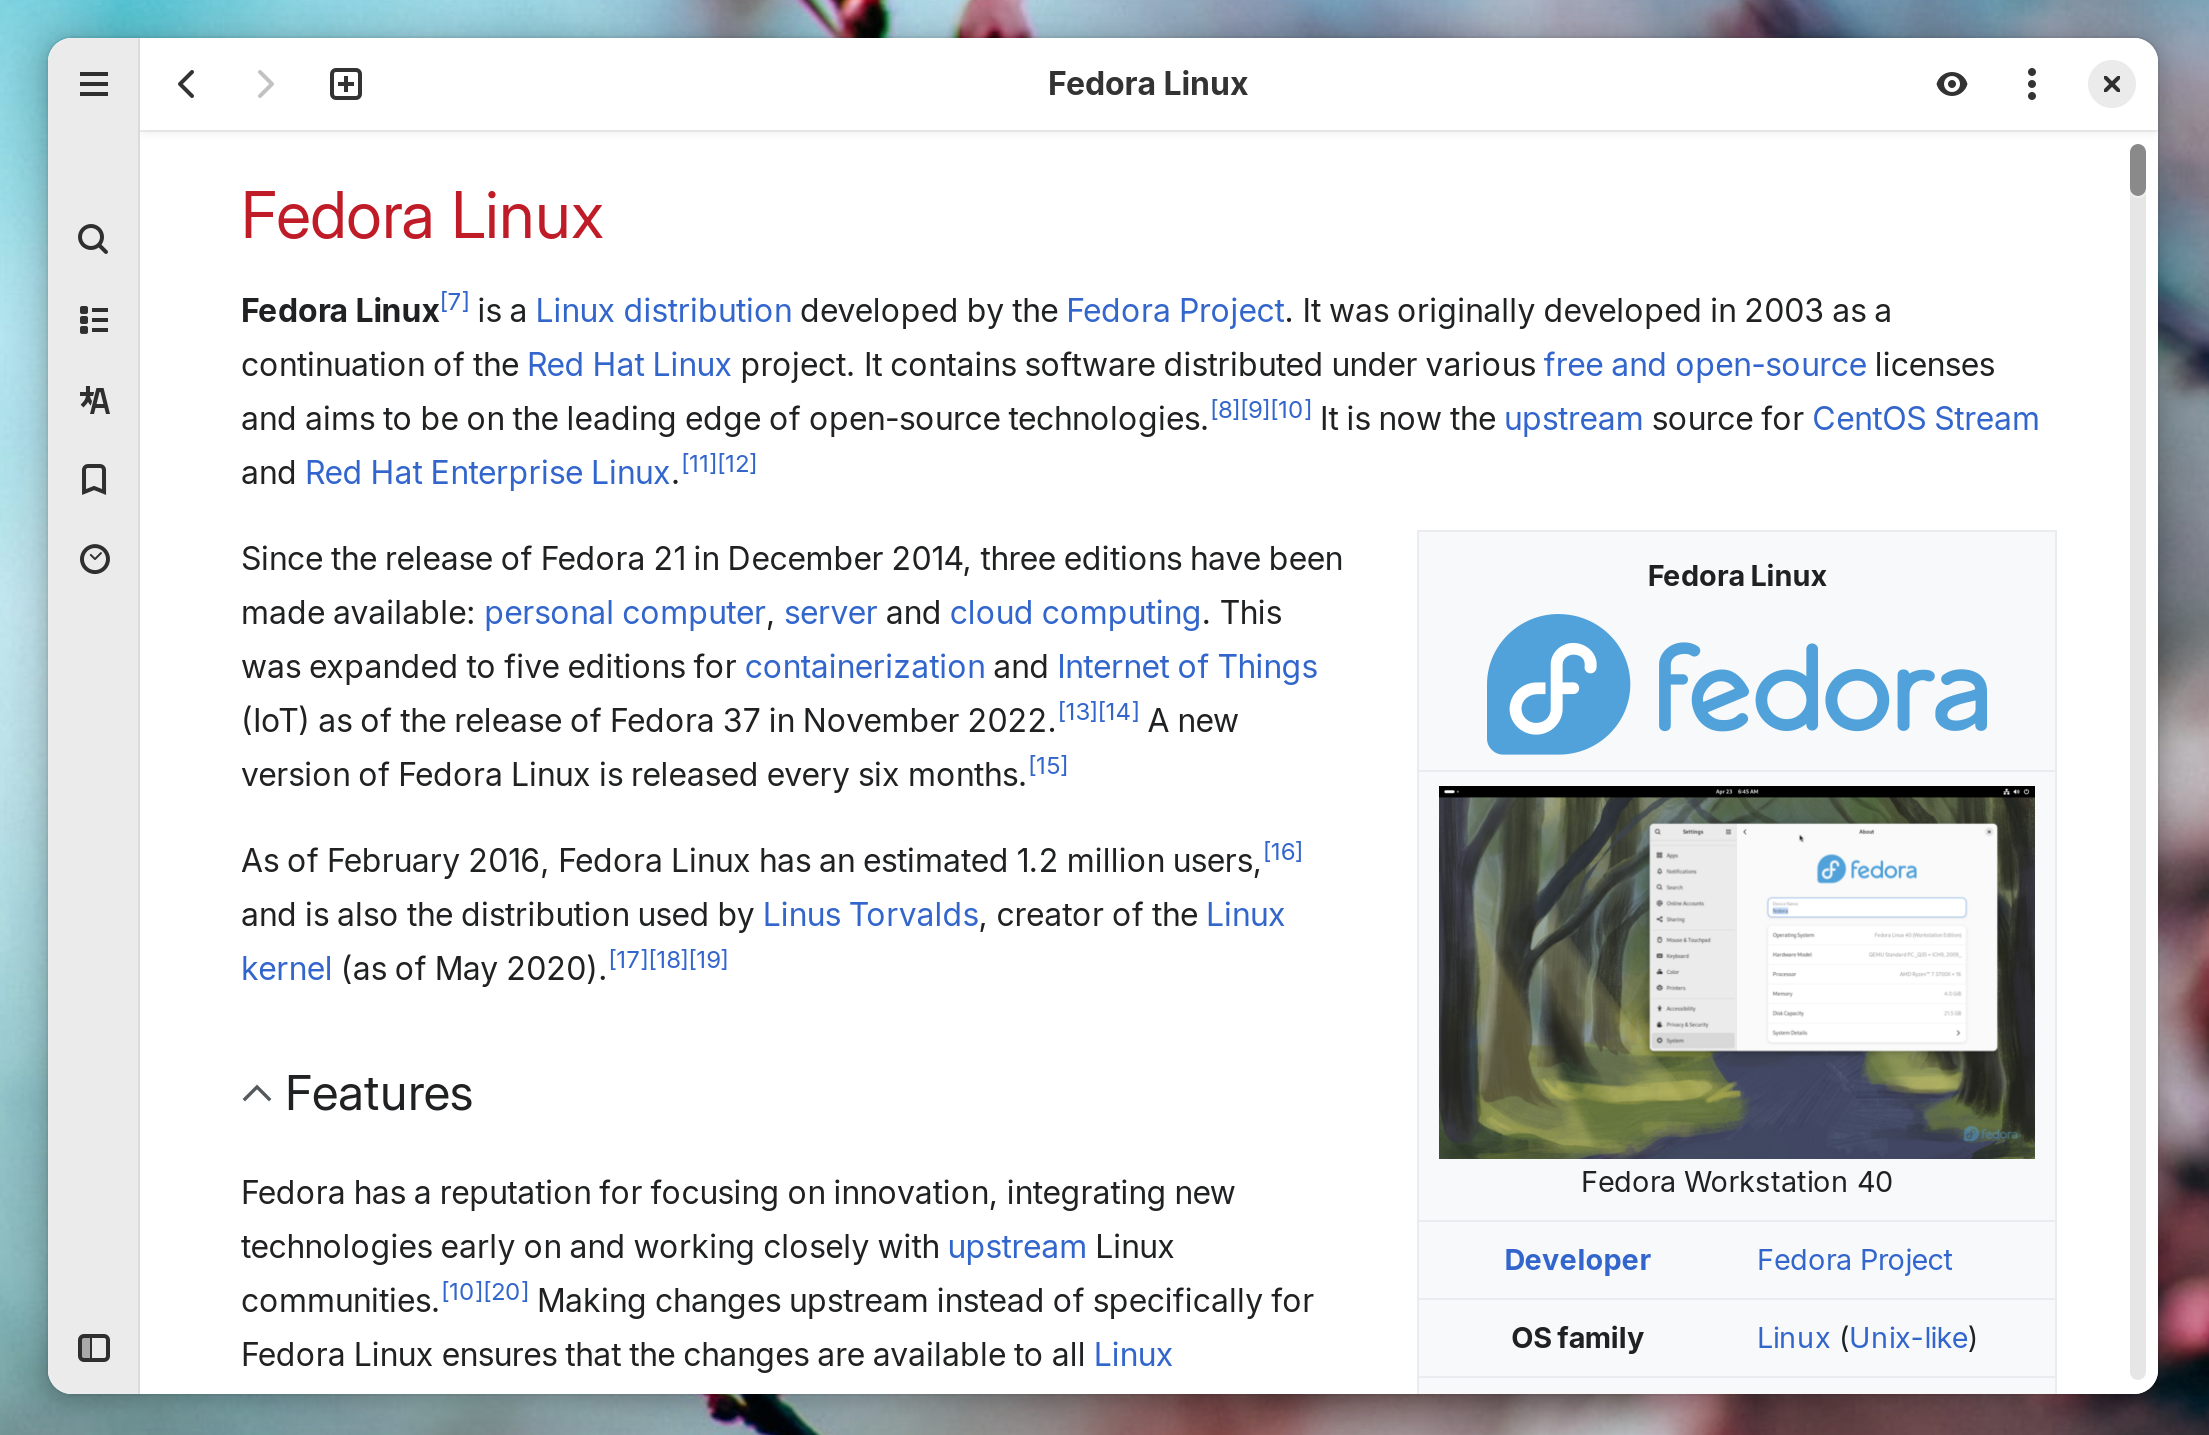 The Fedora Linux Wikipedia page in the Wike app on Linux.